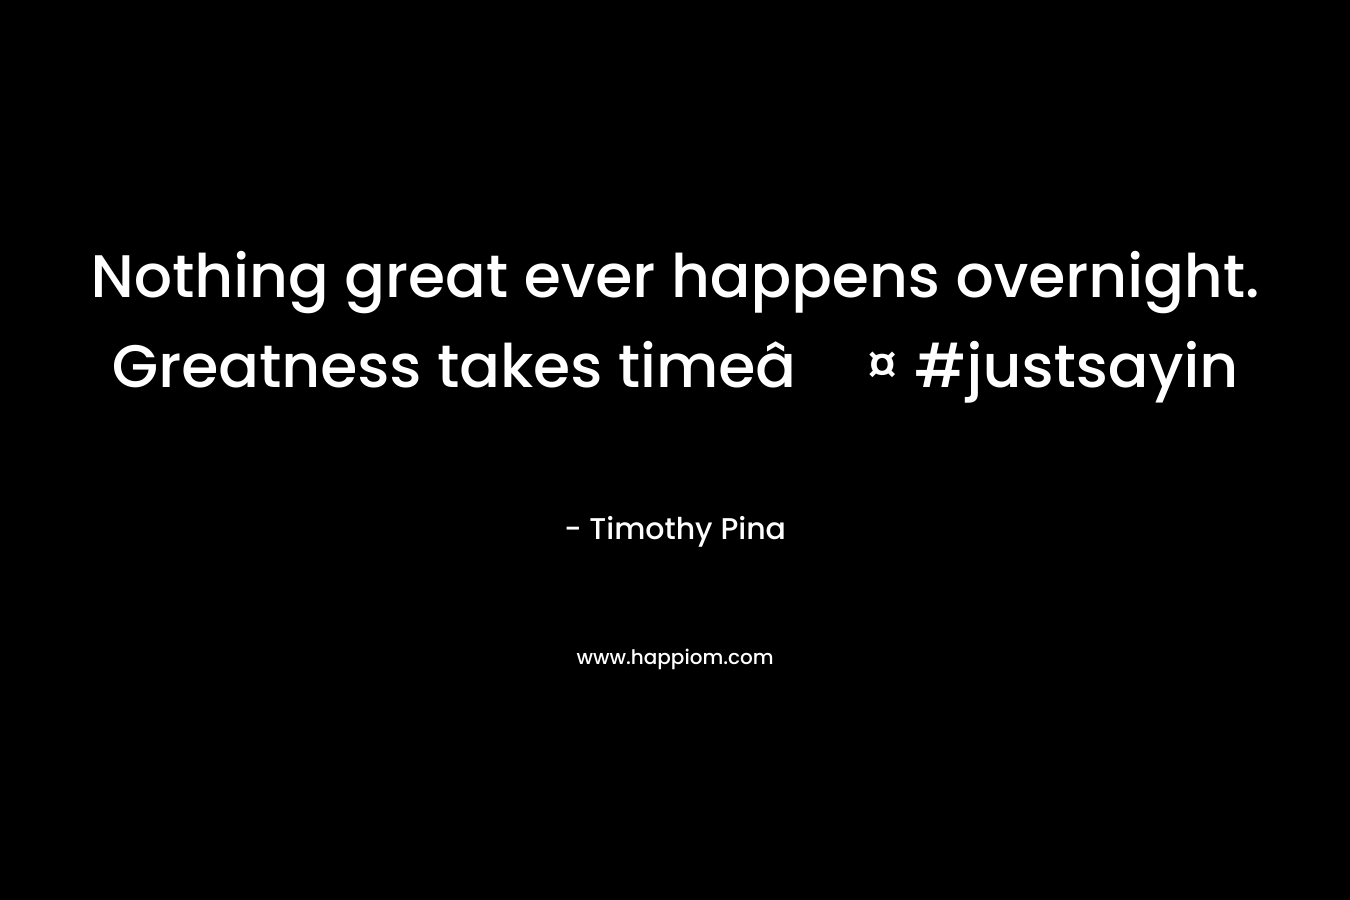 Nothing great ever happens overnight. Greatness takes timeâ¤ #justsayin – Timothy Pina